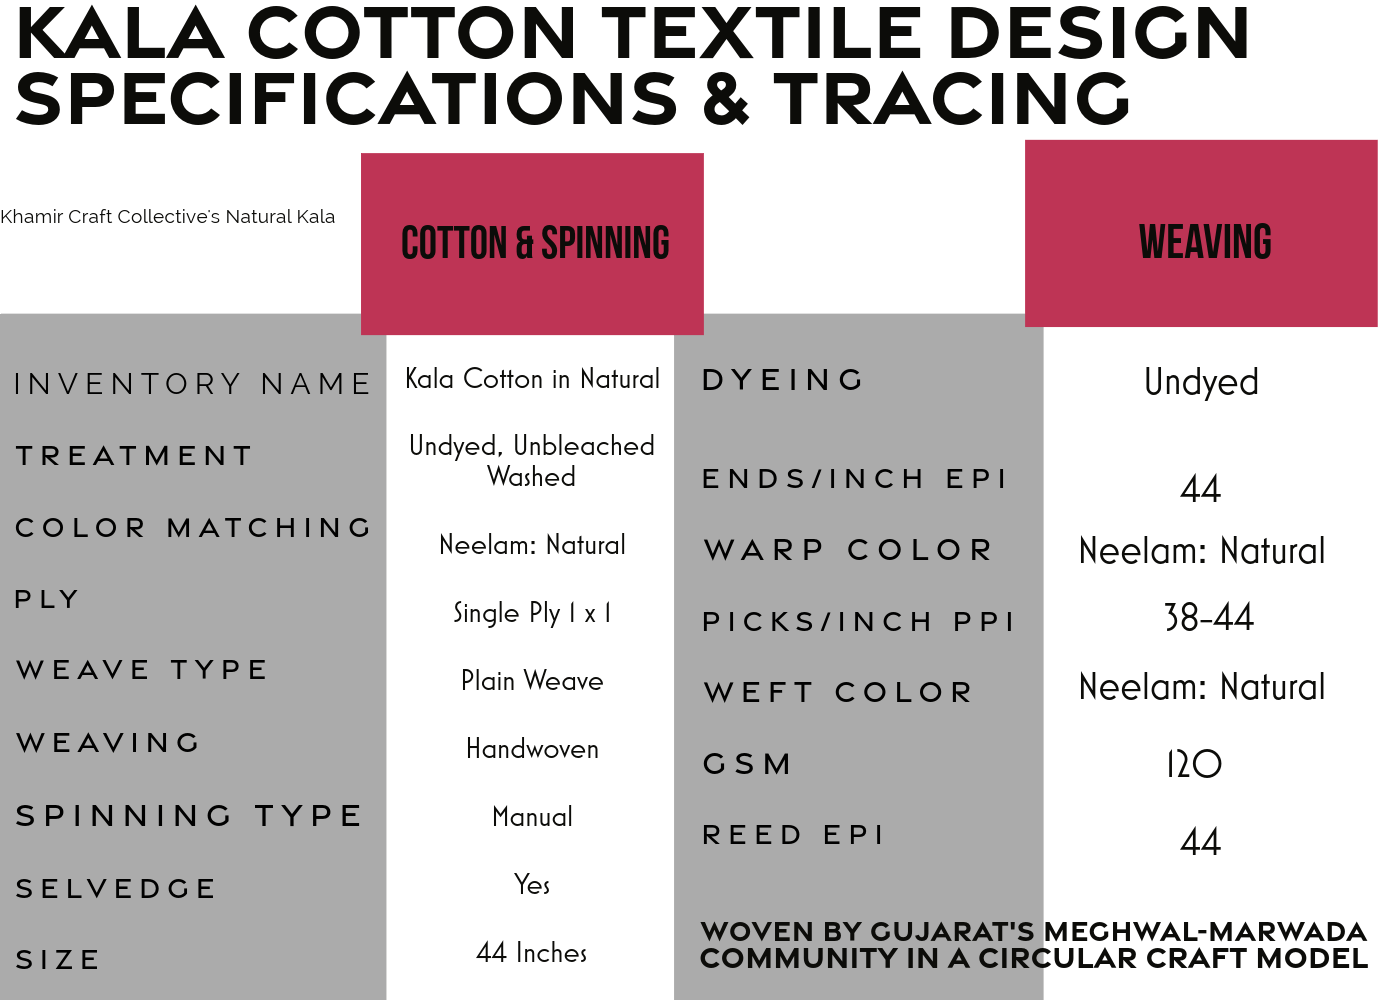 What to Know About Kala Cotton and Fabric Quality - Greige